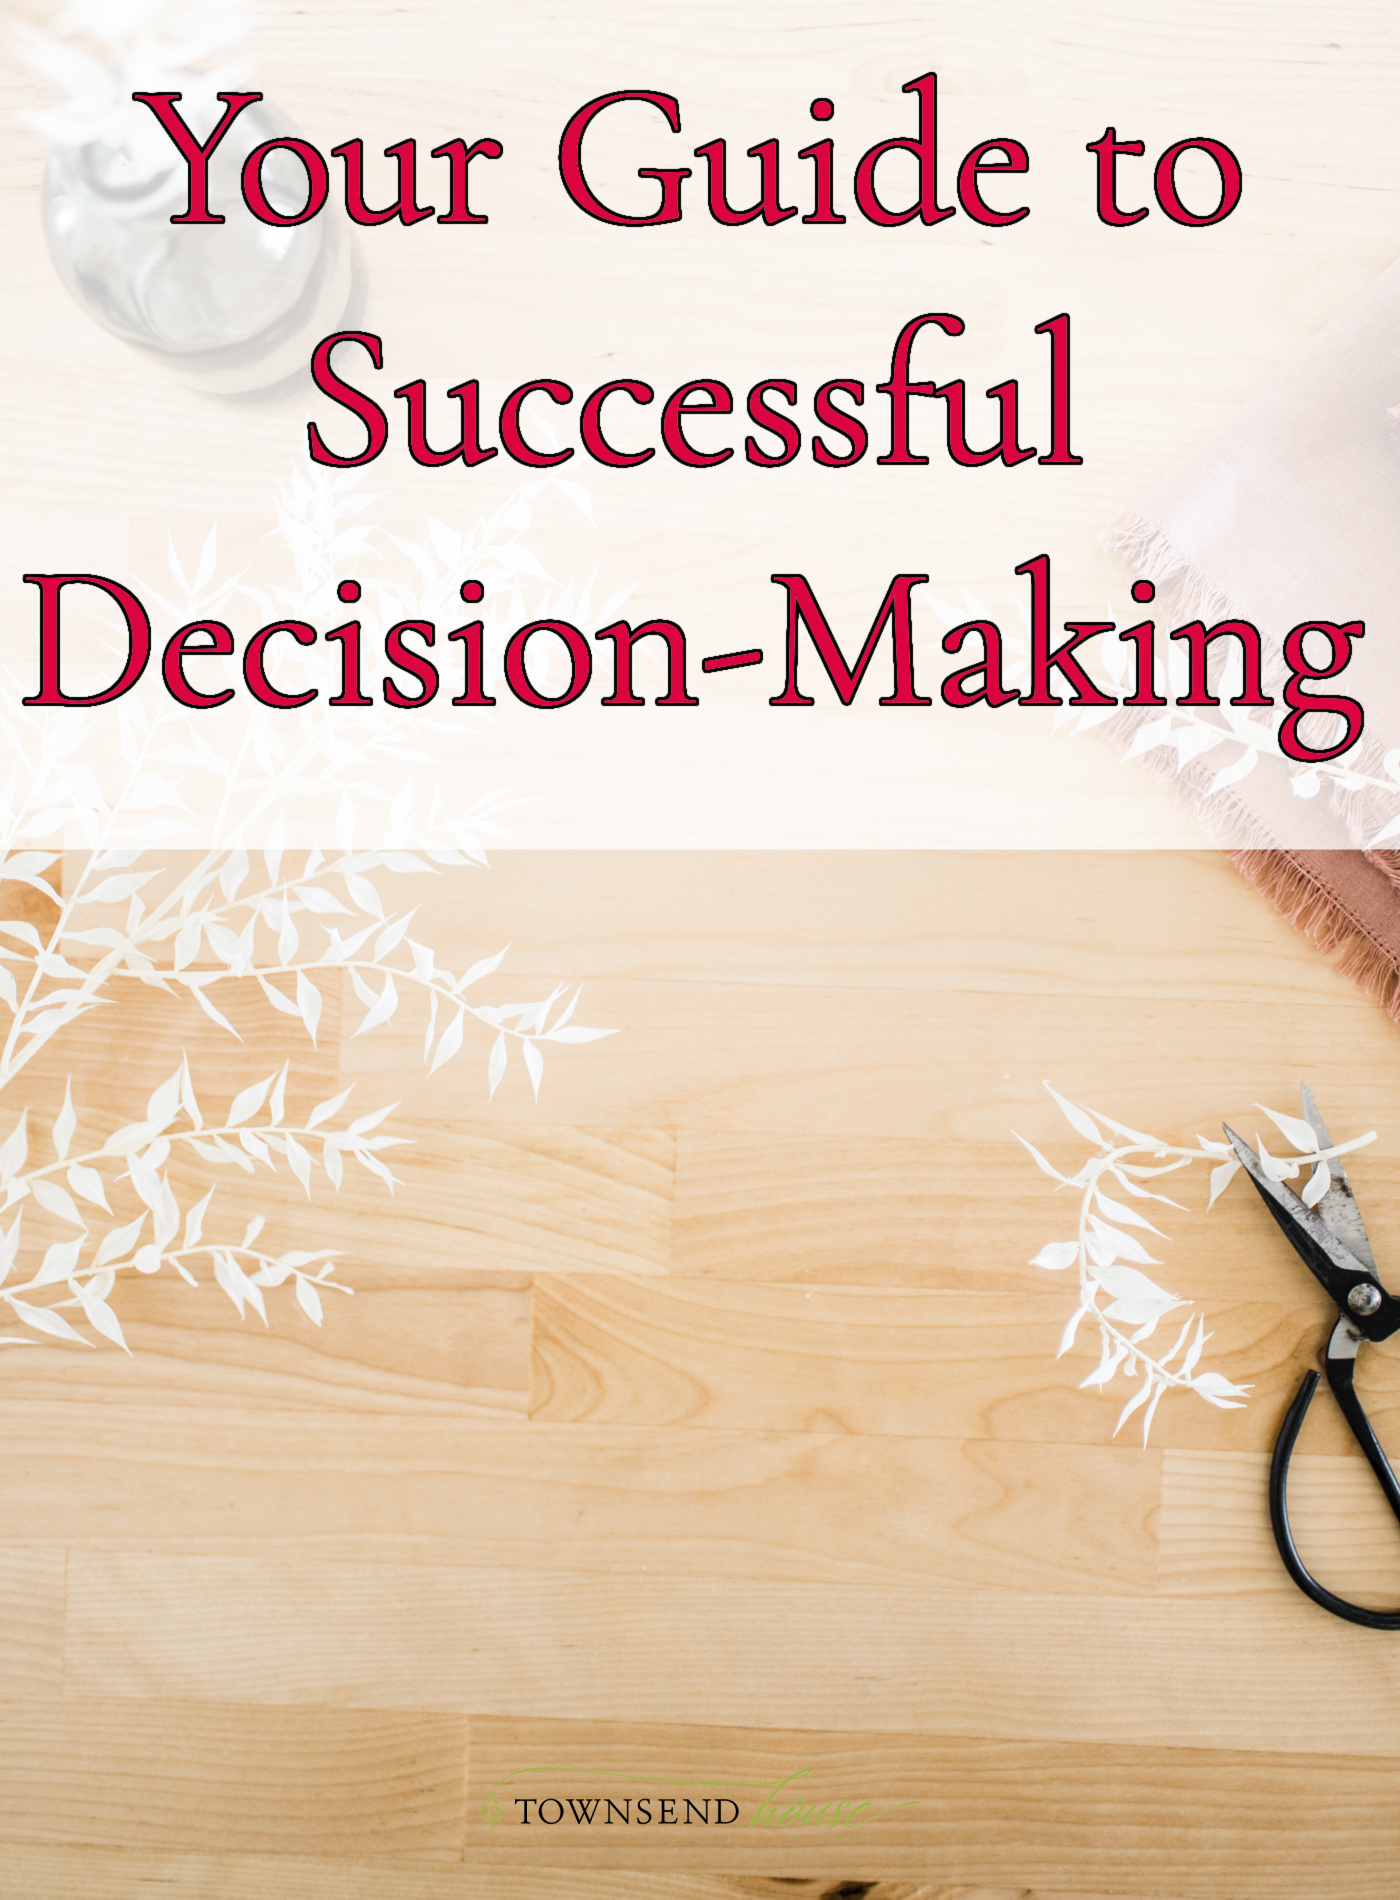 Your Guide to Successful Decision-Making